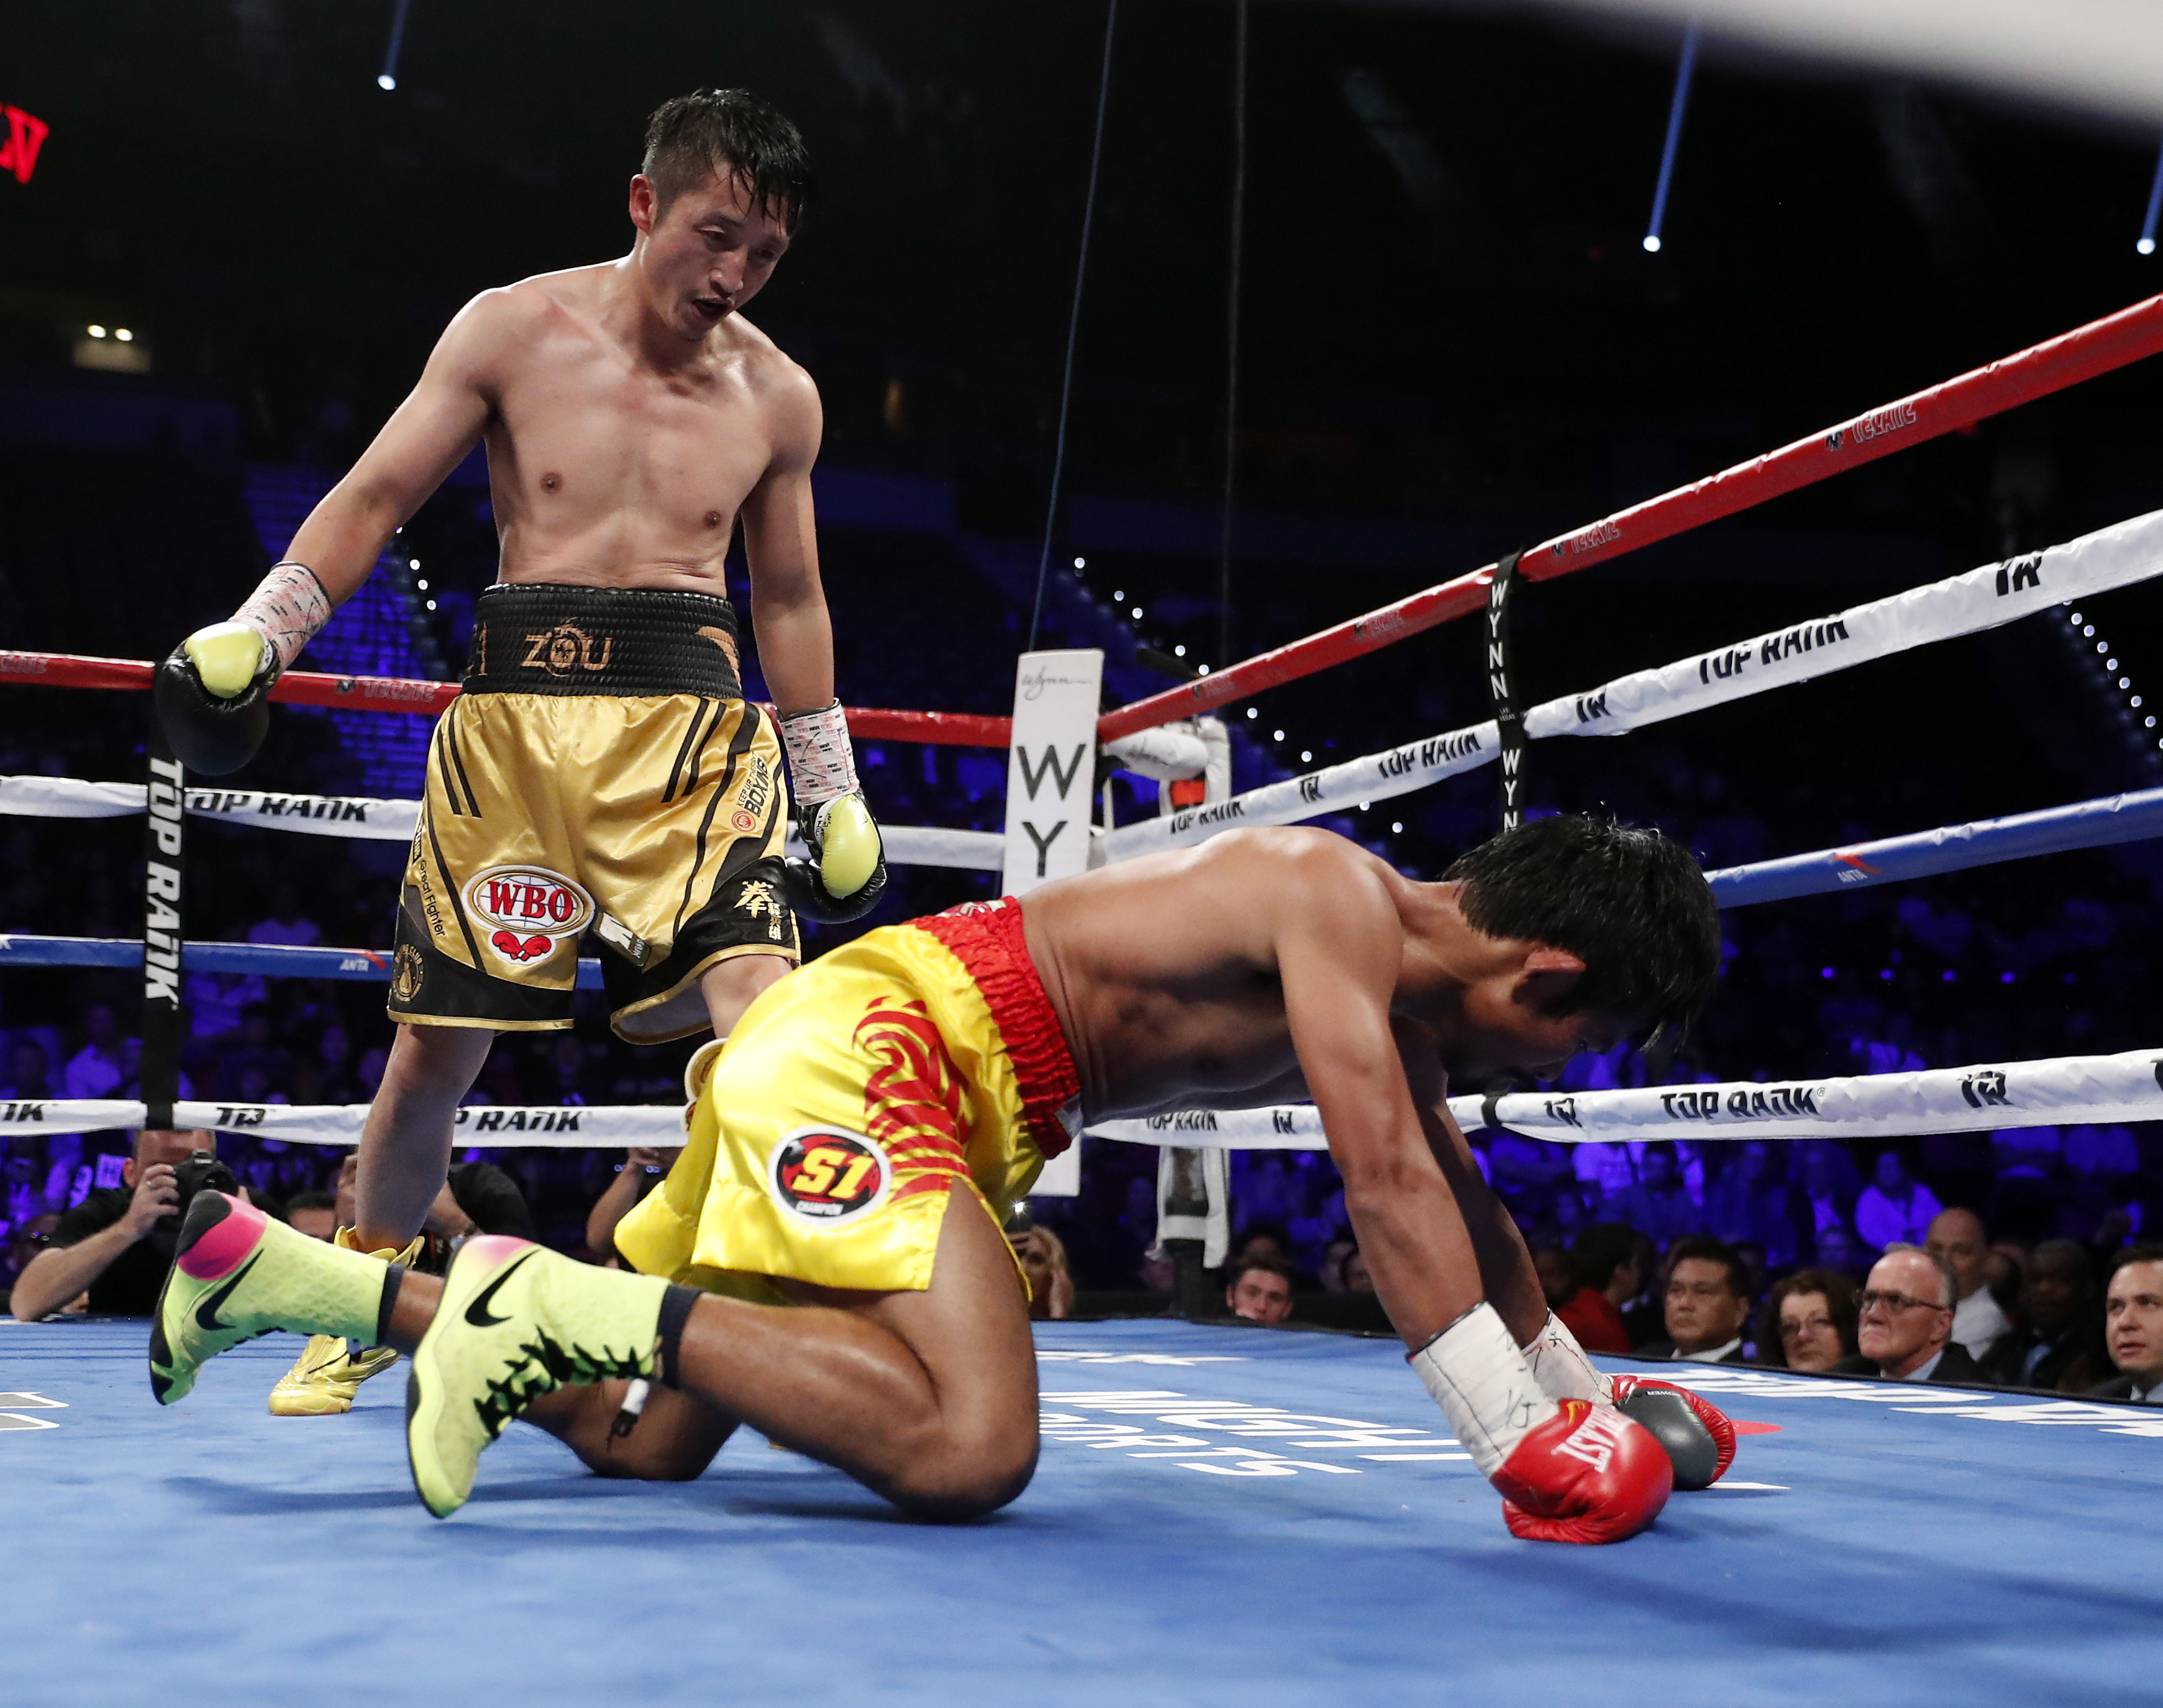 Zou Shiming, of China, stands over Prasitak Phaprom, of Thailand, during their WBO flyweight title boxing match Saturday, Nov. 5, 2016, in Las Vegas. Zou won by unanimous decision. (AP Photo/Isaac Brekken)